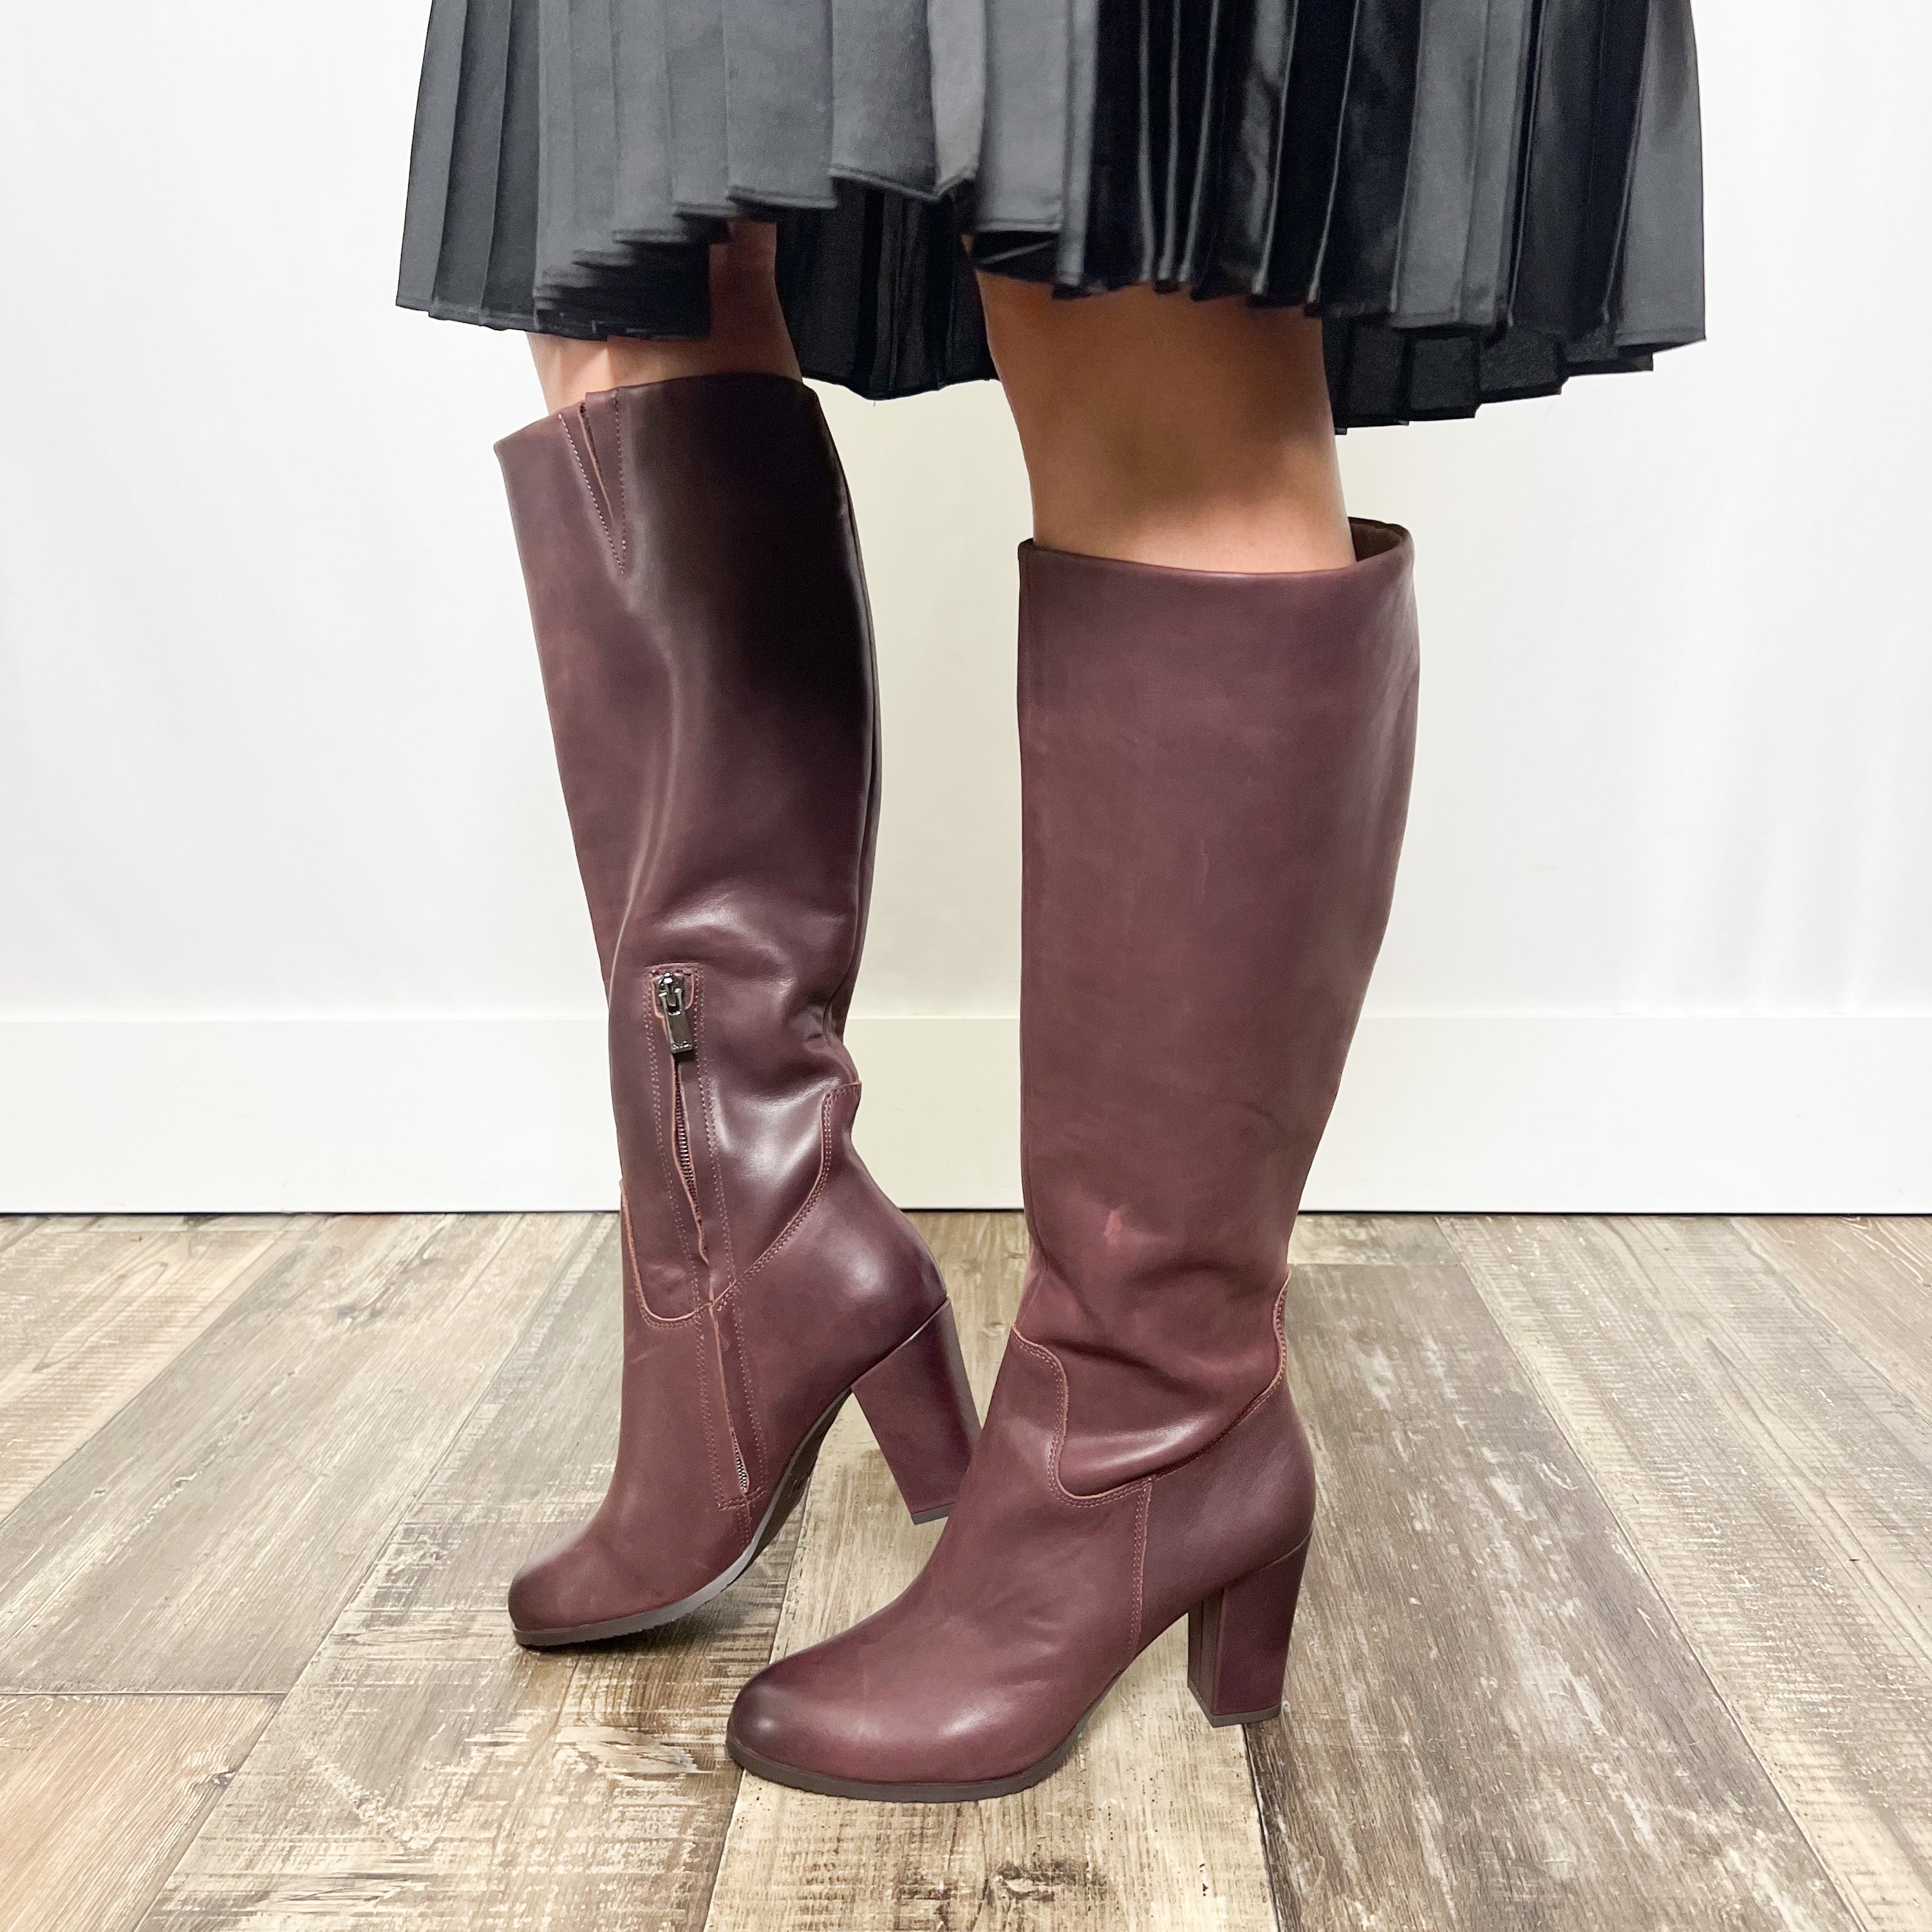 19,308 Brown Dress Boots Royalty-Free Images, Stock Photos & Pictures |  Shutterstock